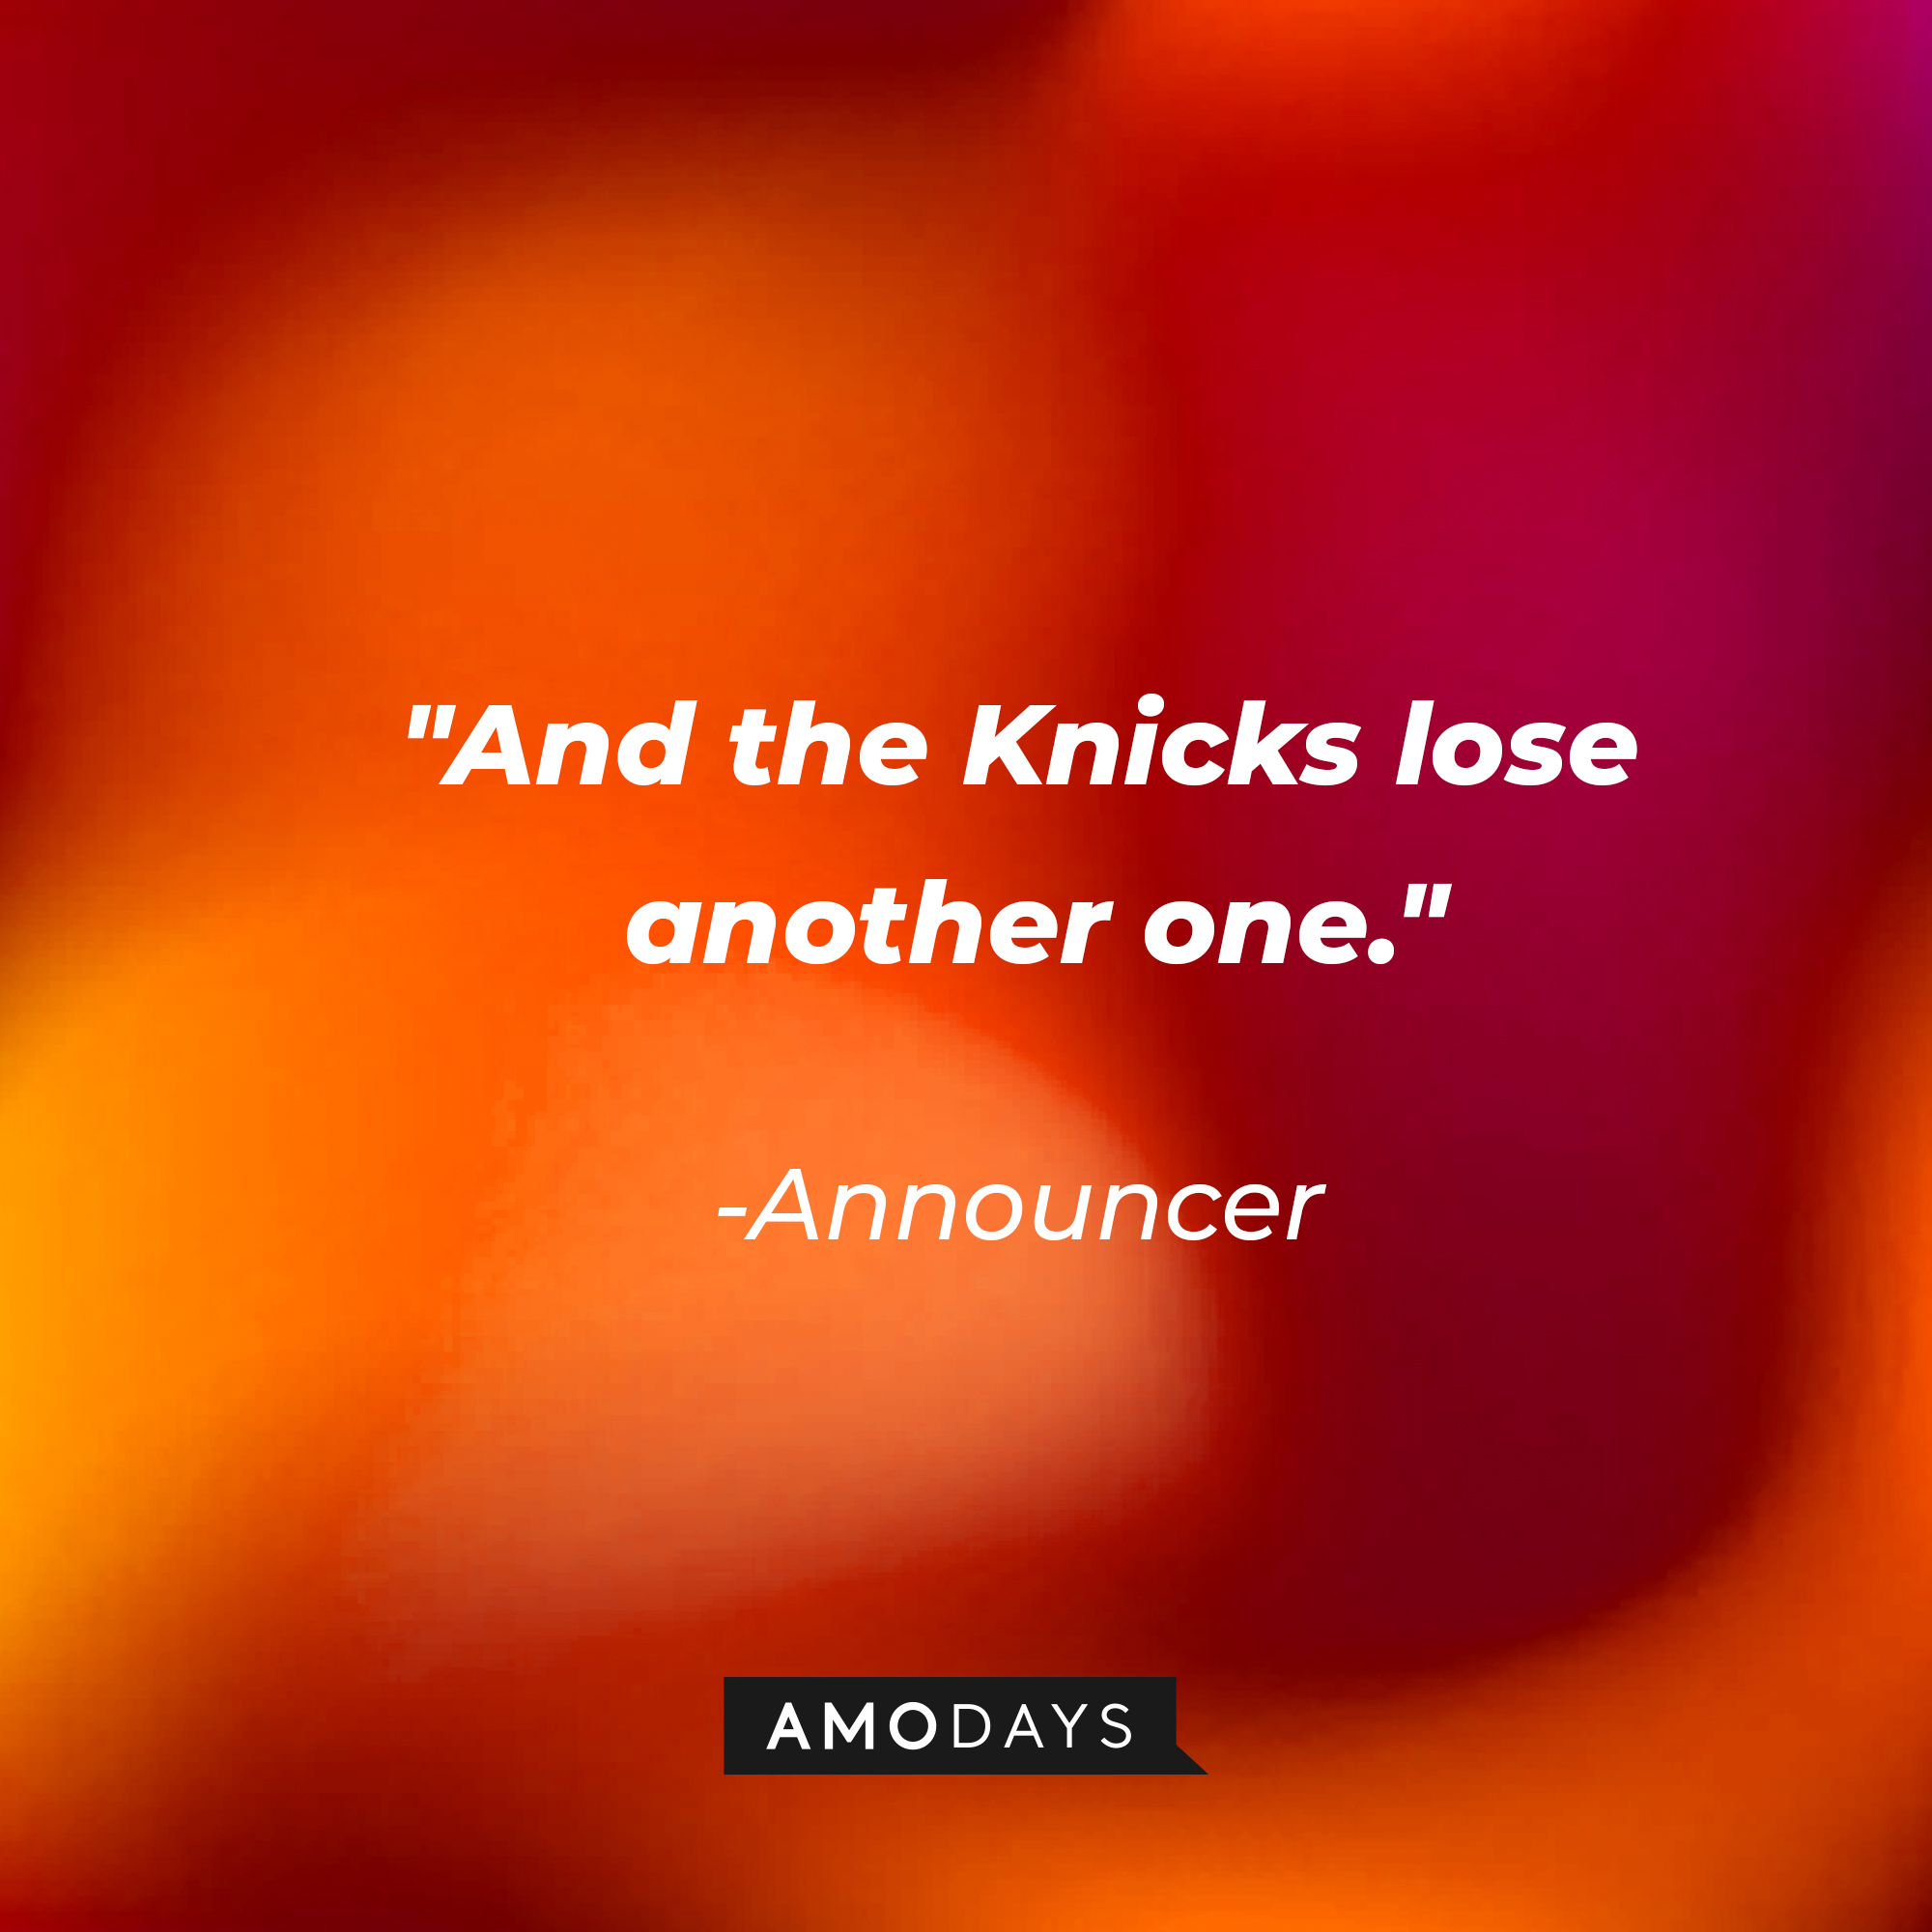 Announcer's quote: "And the Knicks lose another one." | Source: youtube.com/pixar